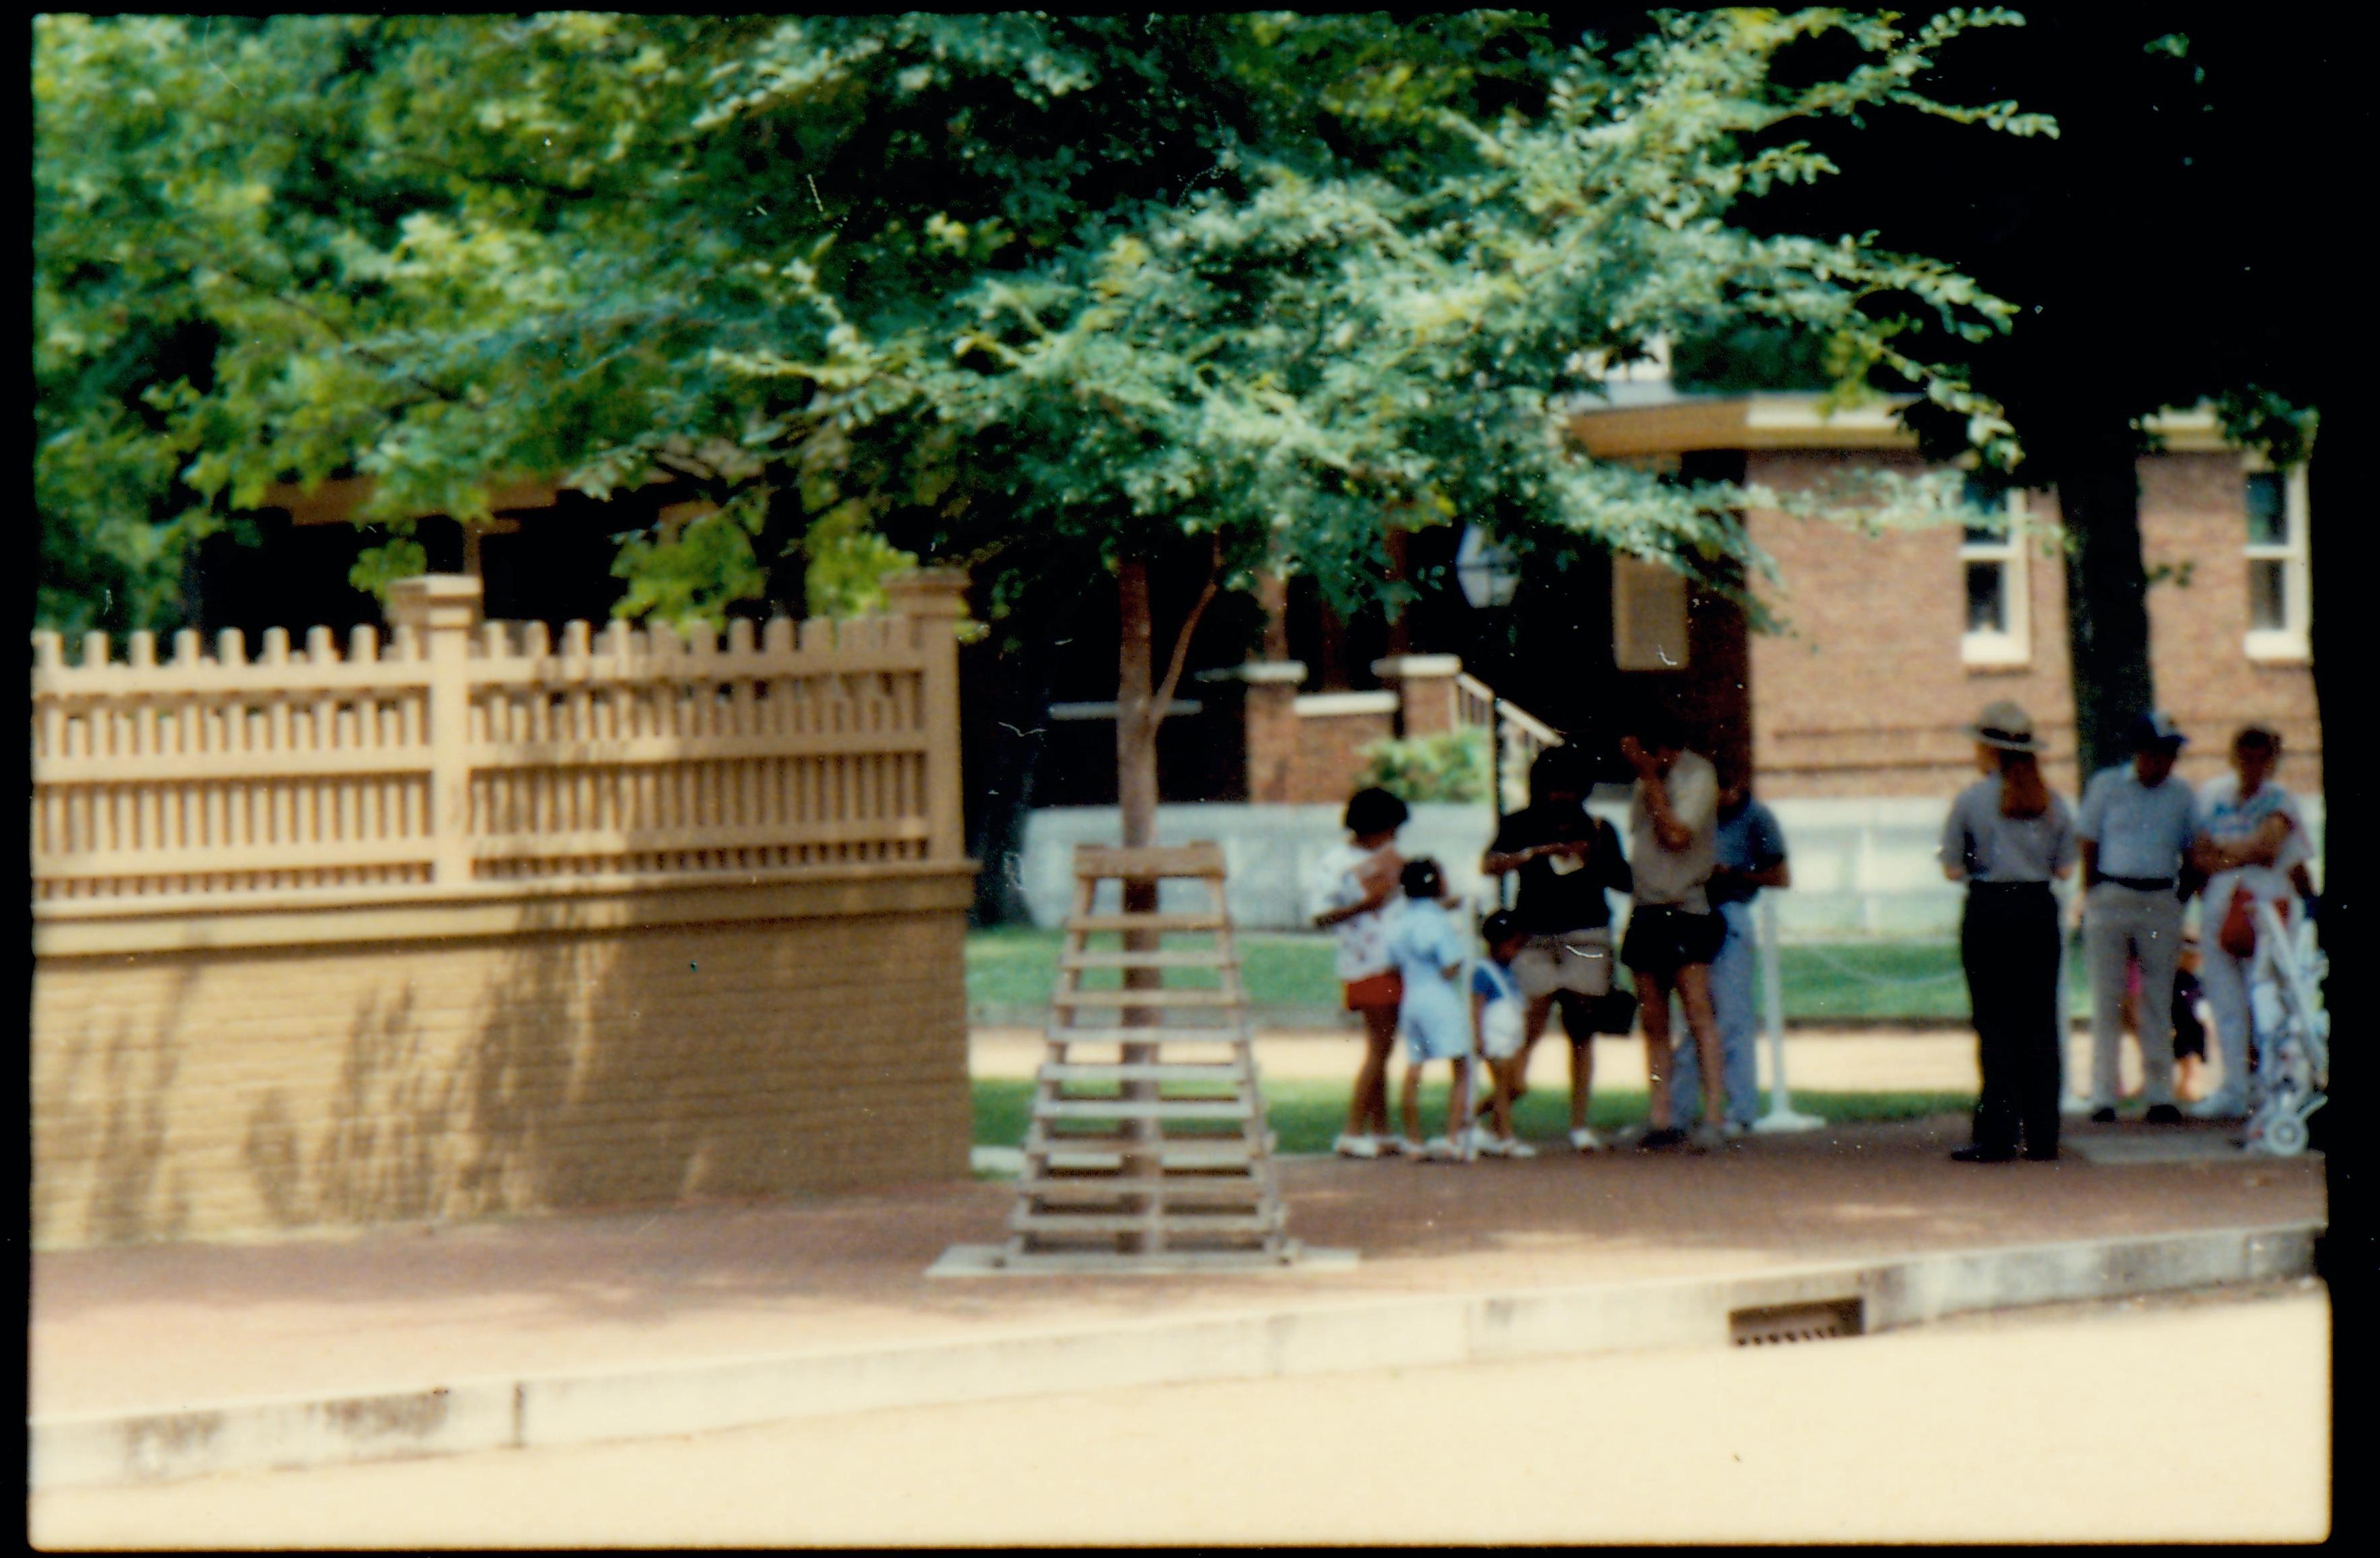 A ranger with a group of visitors on the brick plaza south west of the Lincoln Home. Summer. Unrestored Arnold House in background. Photographer facing south east.